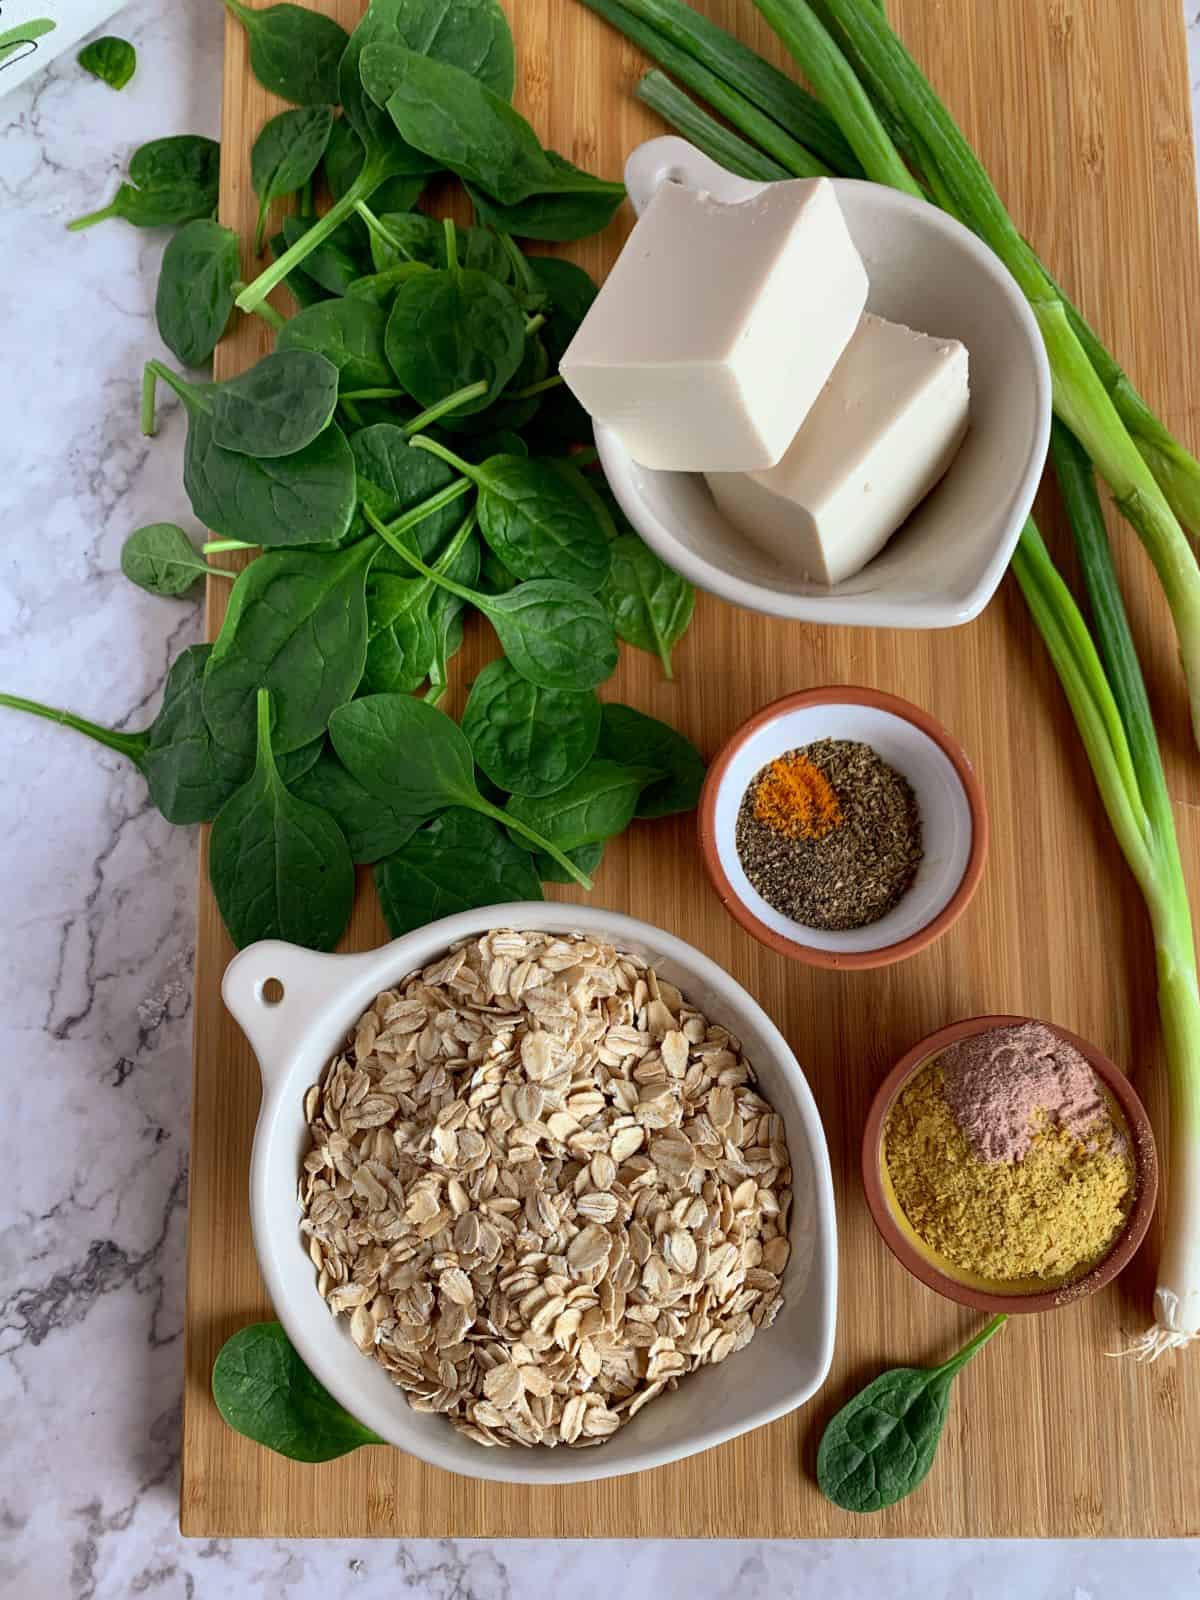 ingredients for savory oatmeal, oats, spinach, spices, tofu and green onions, laid out on a wooden board.